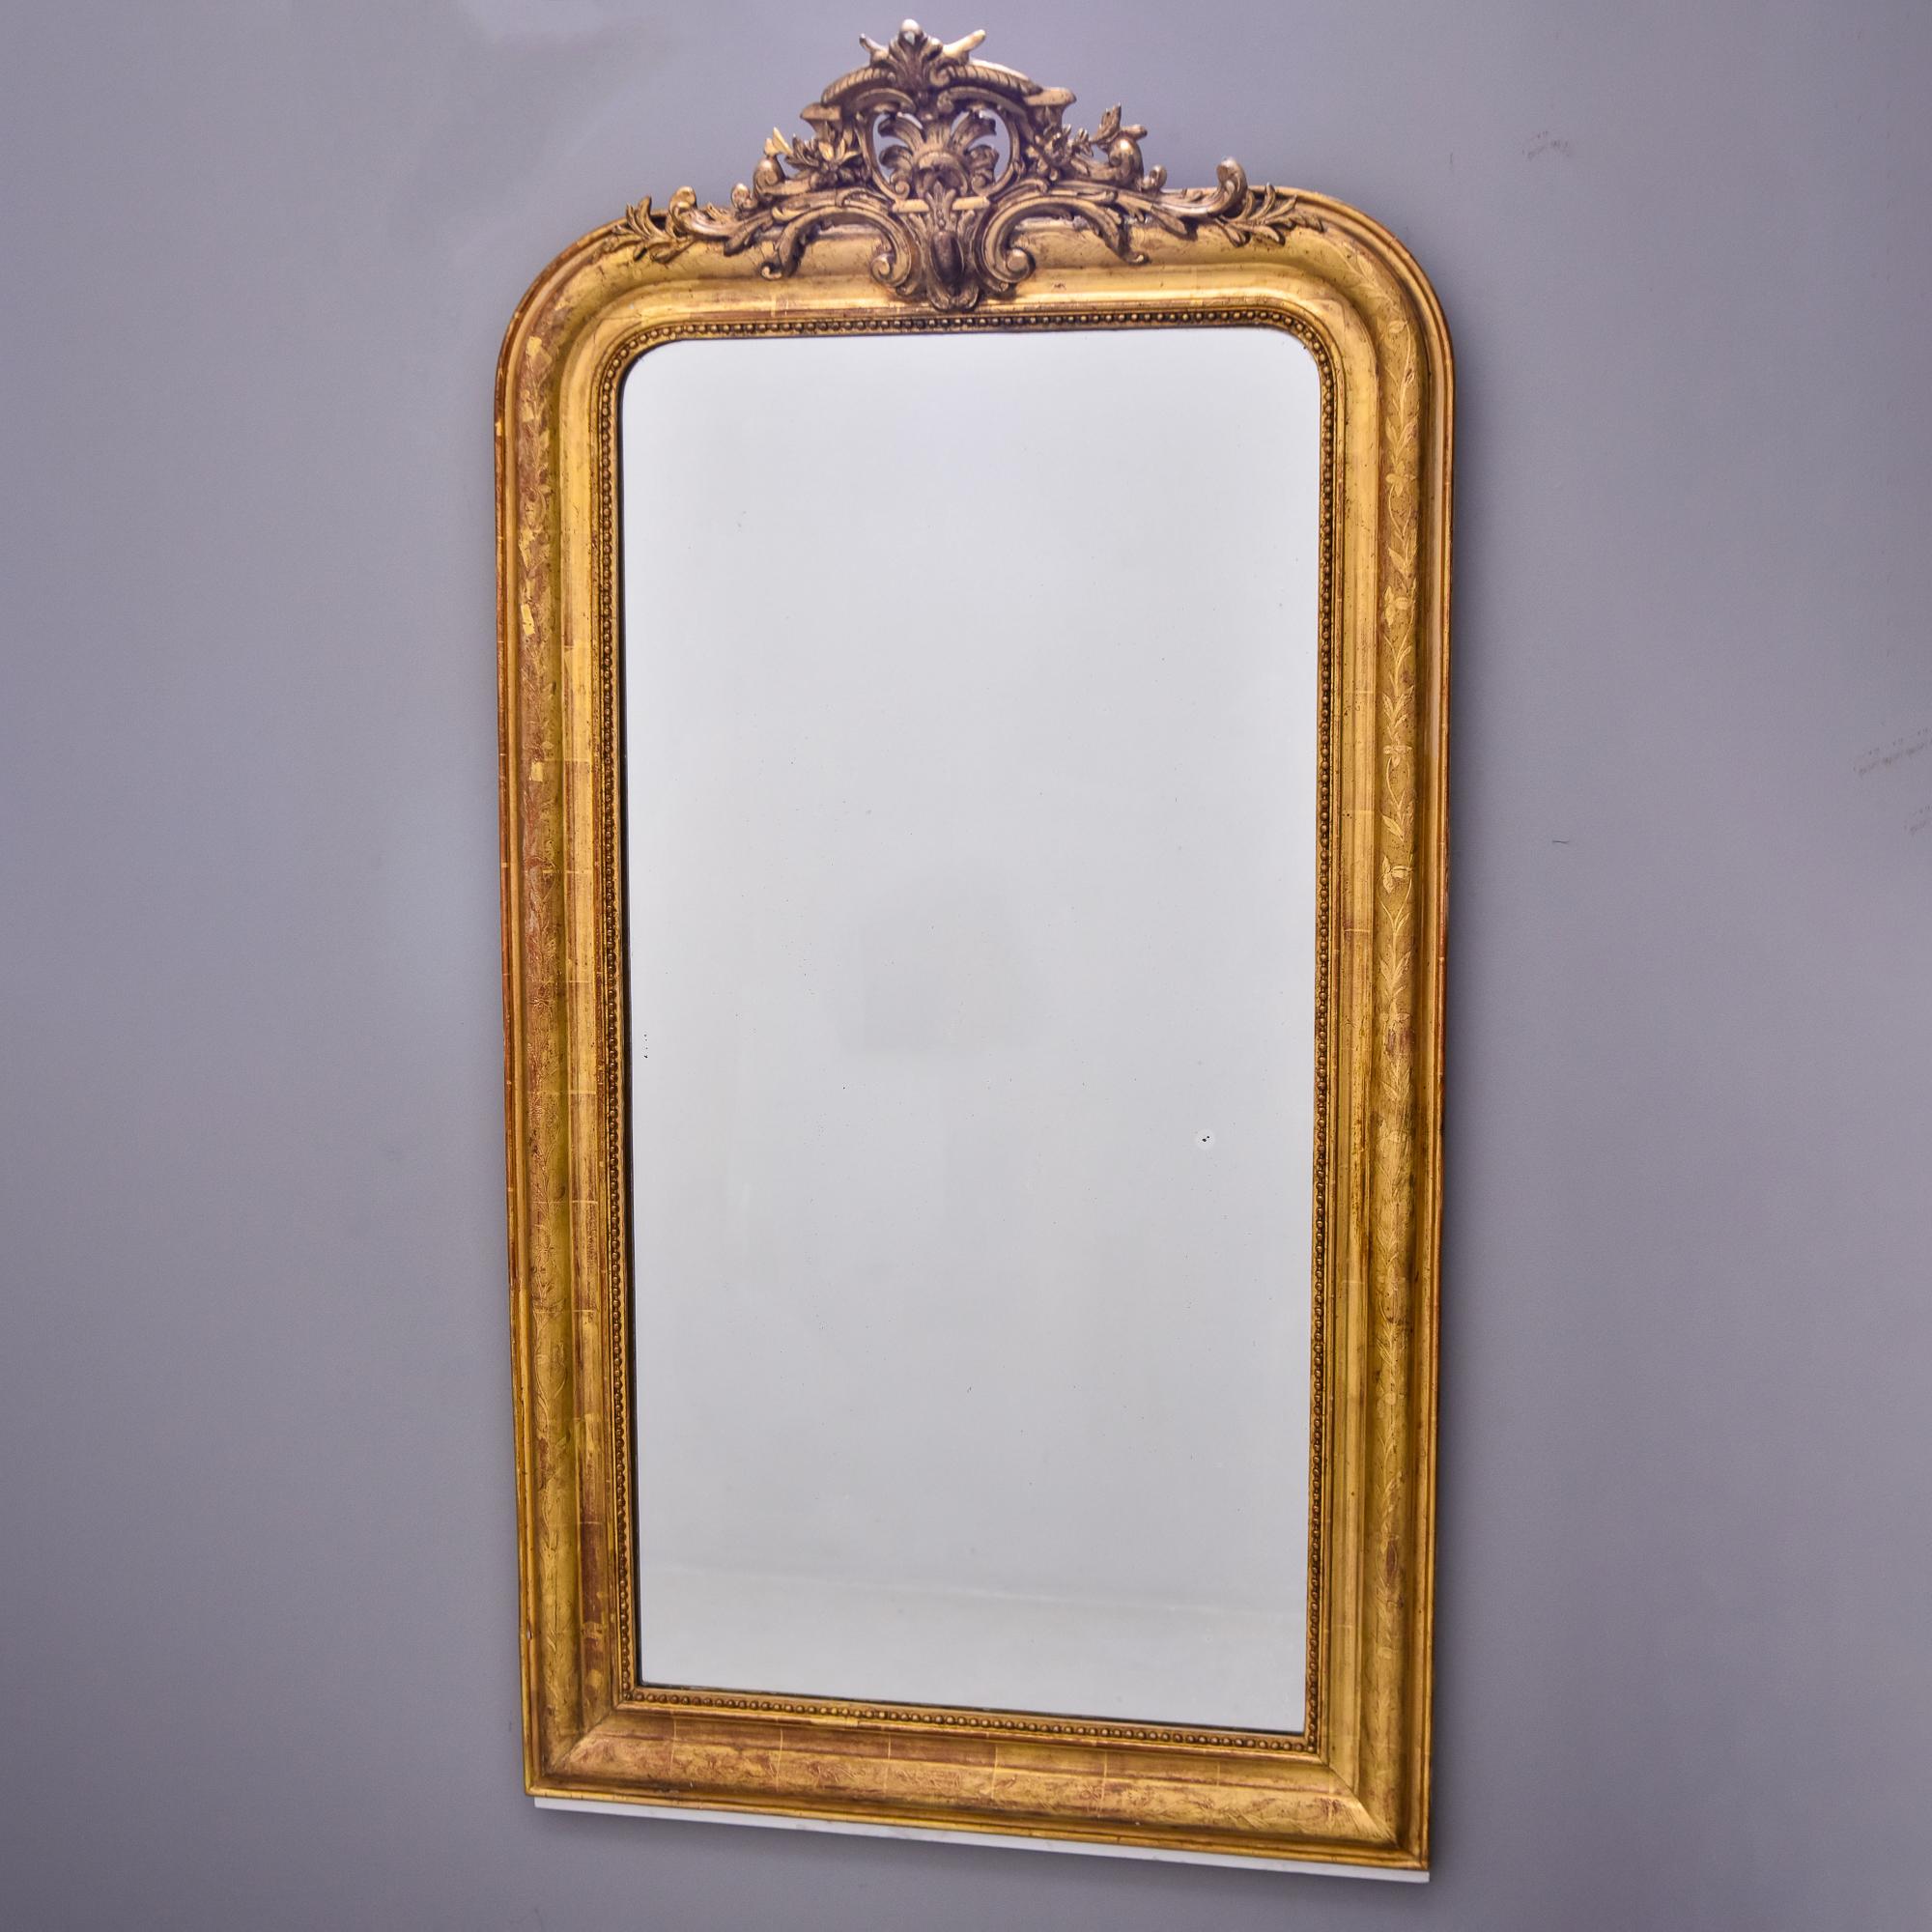 Found in France, this crested Louis Philippe giltwood mirror dates from the 1860s. Frame has a subtle etched leaf and vine design all around, an inner beaded edge and a detailed, open work crown. Mirror is old and has some small foggy spots. Unknown